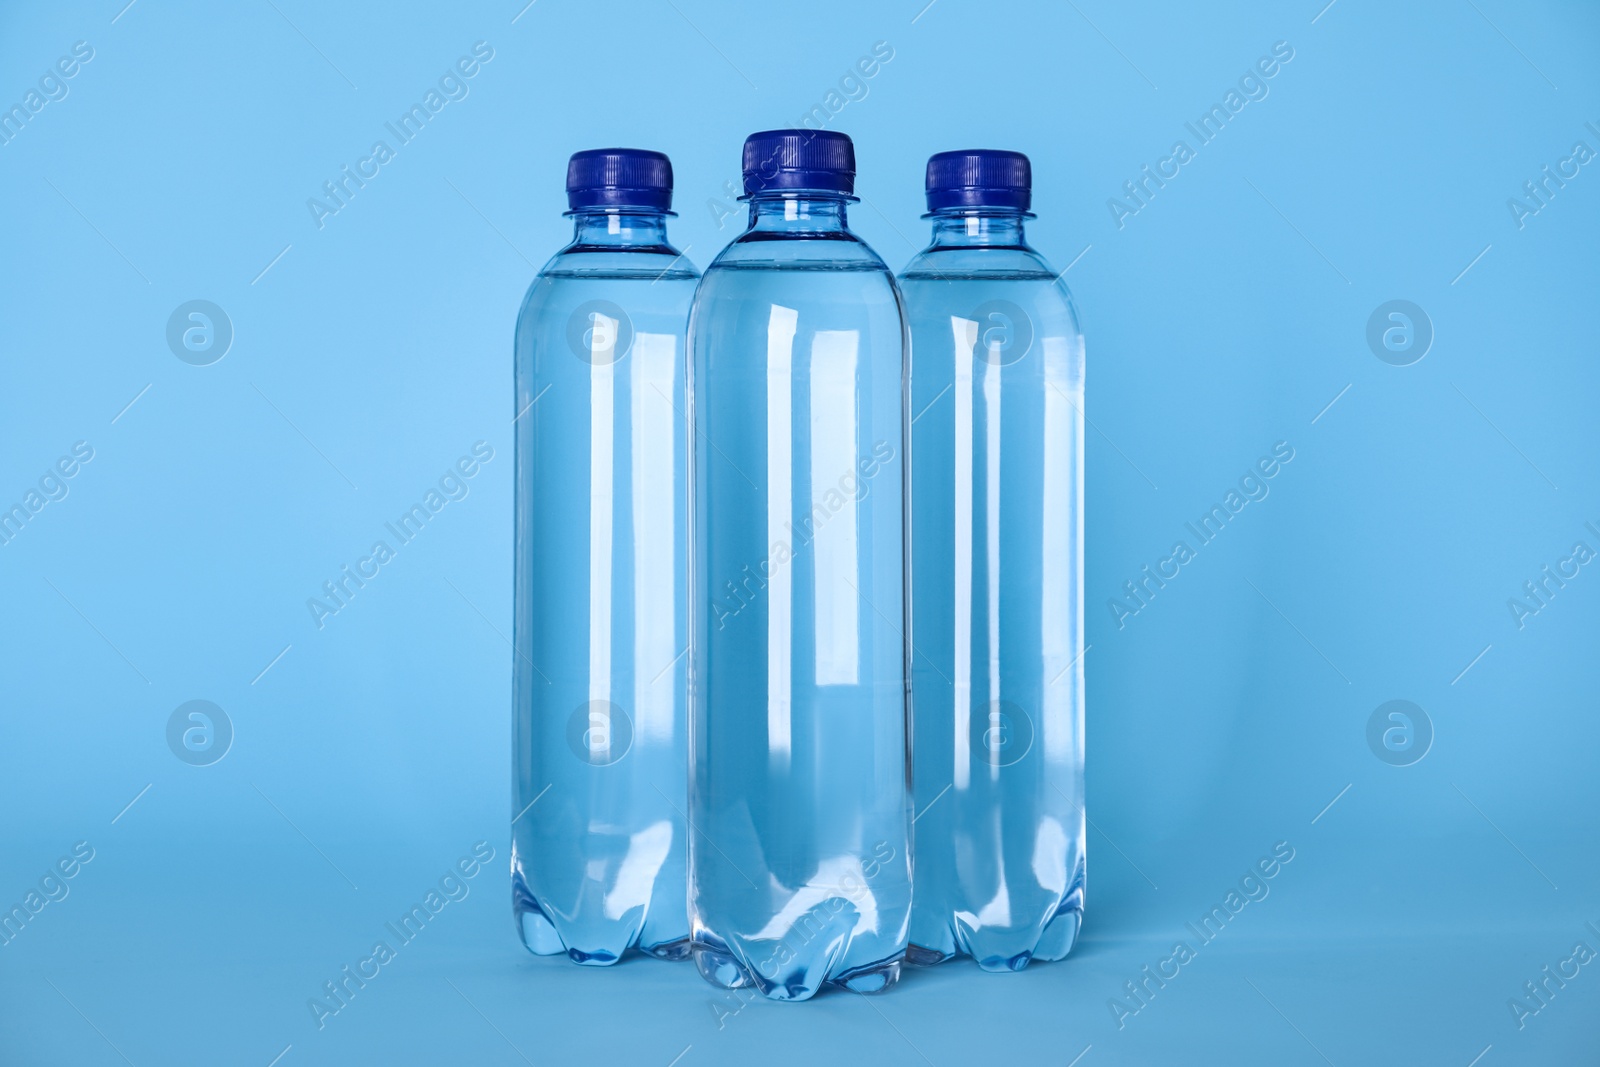 Photo of Plastic bottles with water on light blue background